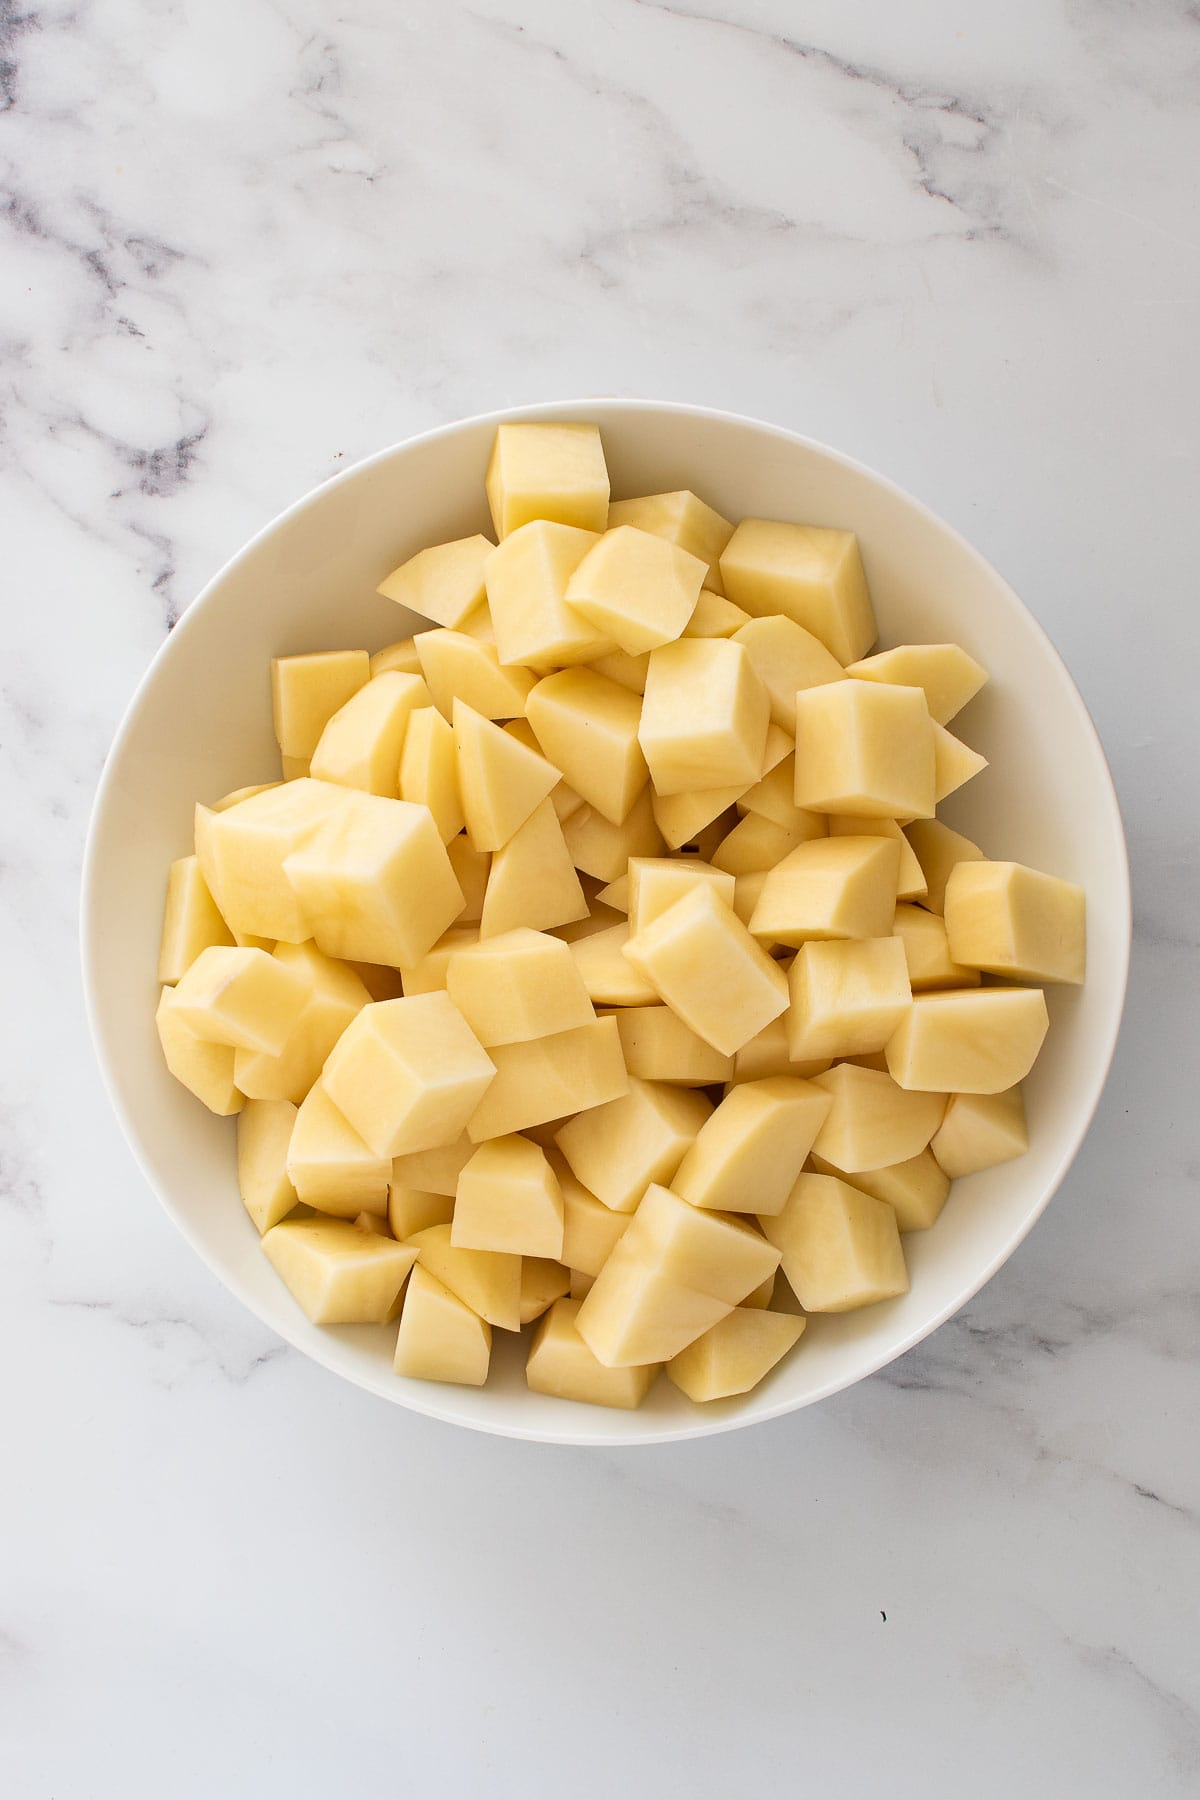 Cubed potatoes in a bowl.